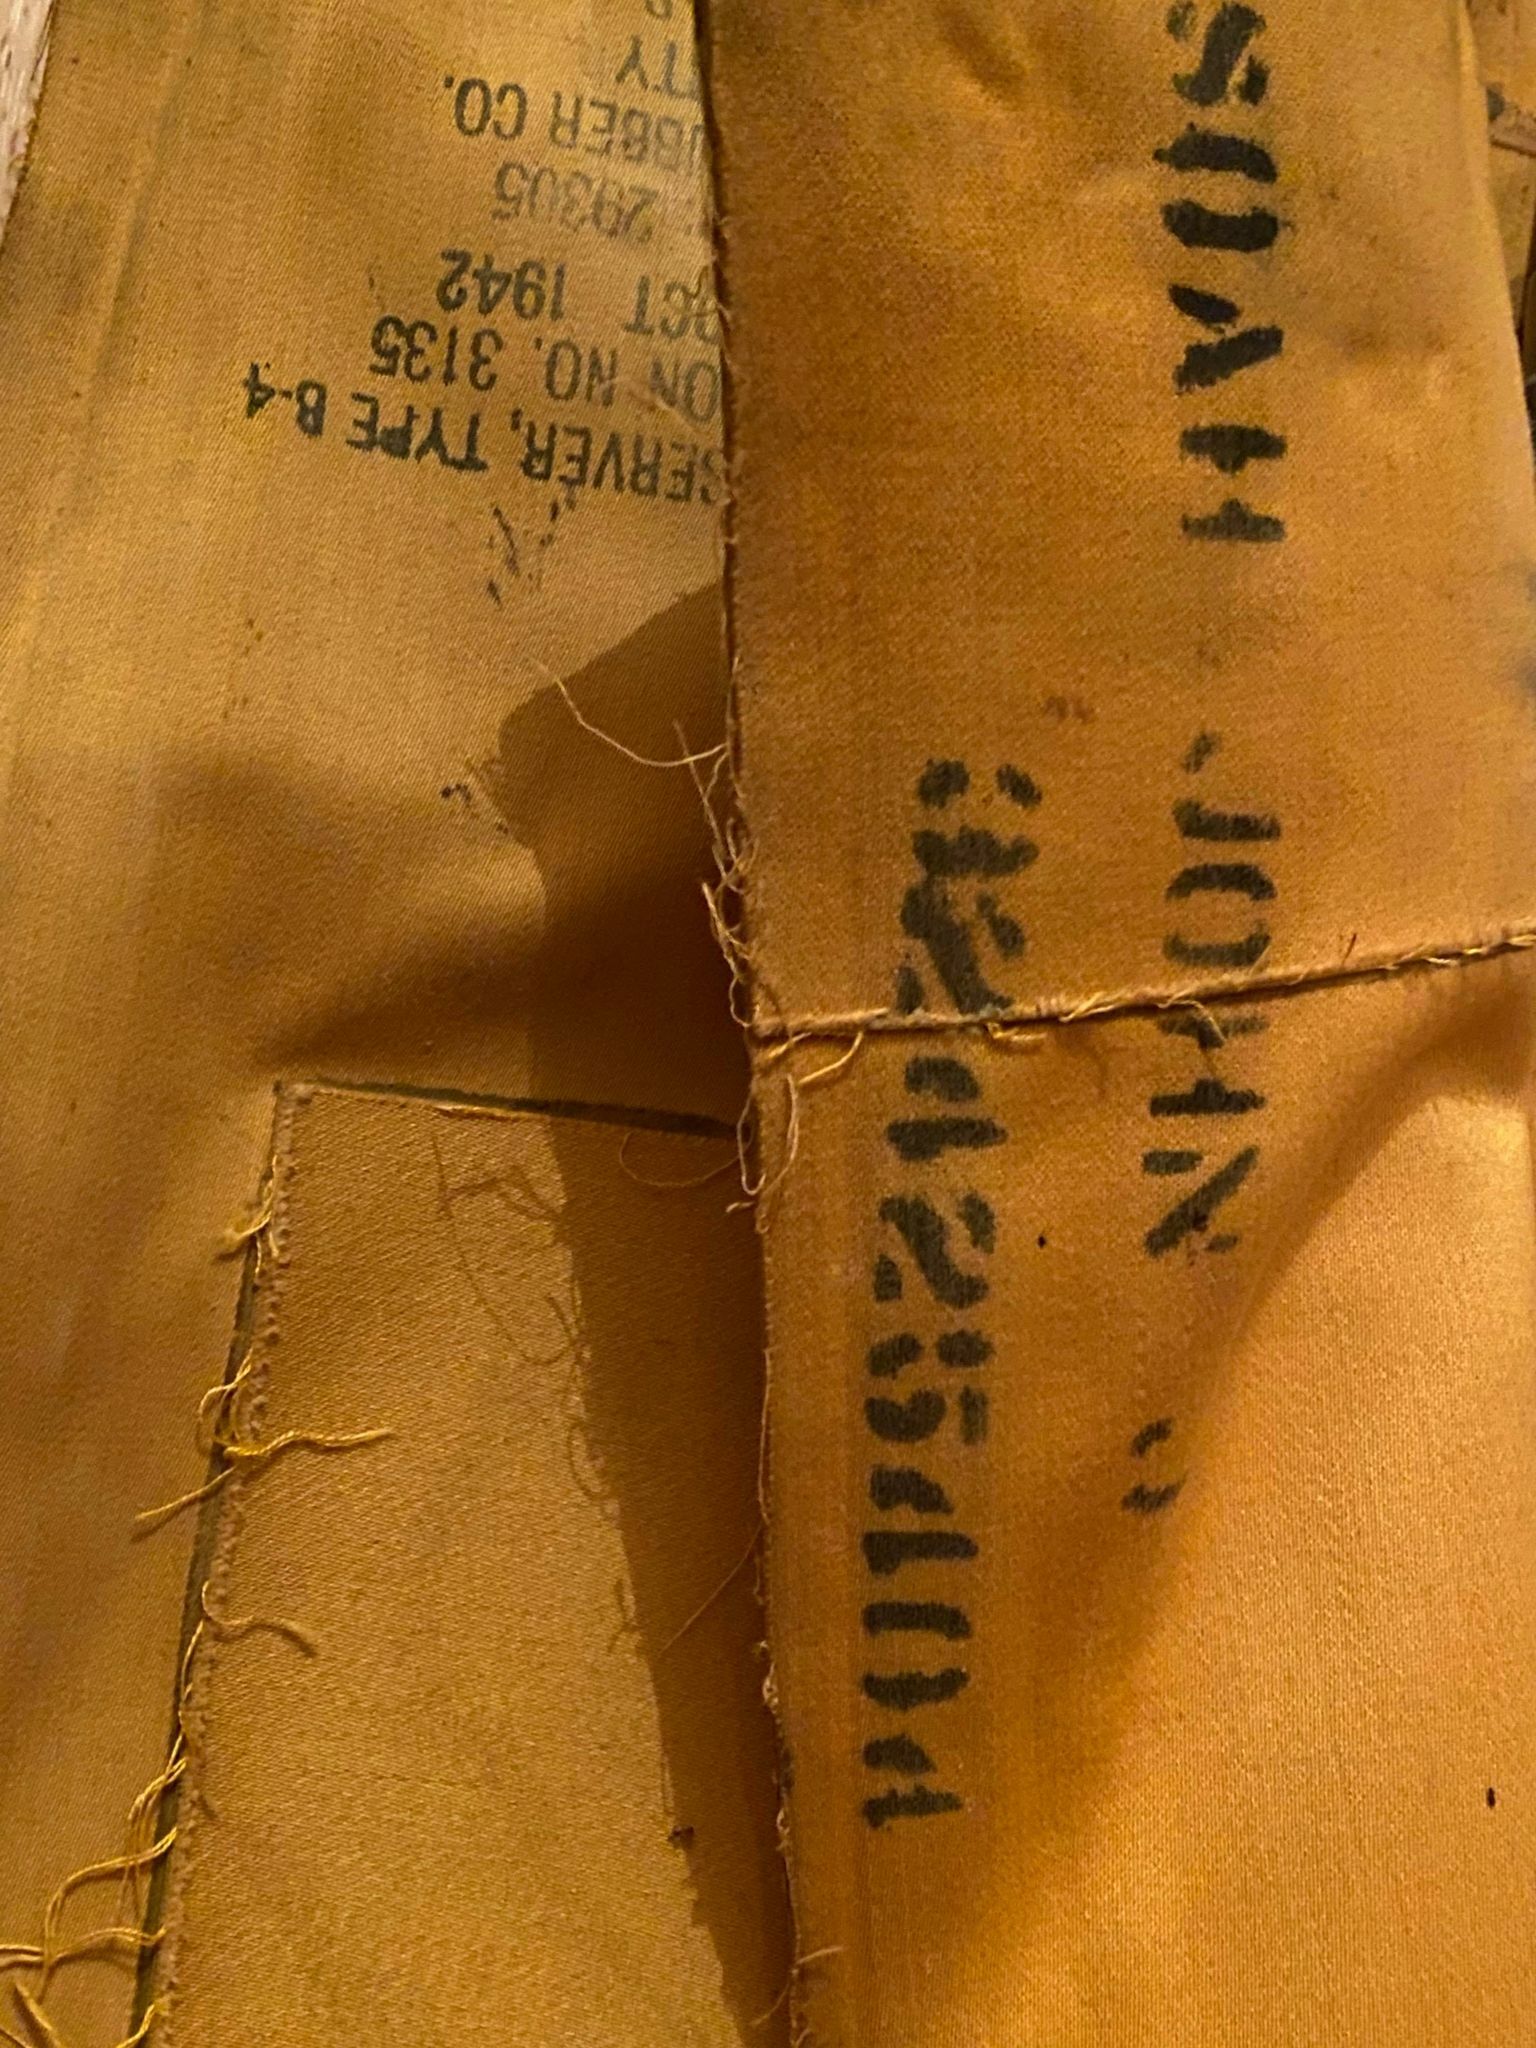 The name John Soah is stenciled on the life jacket.